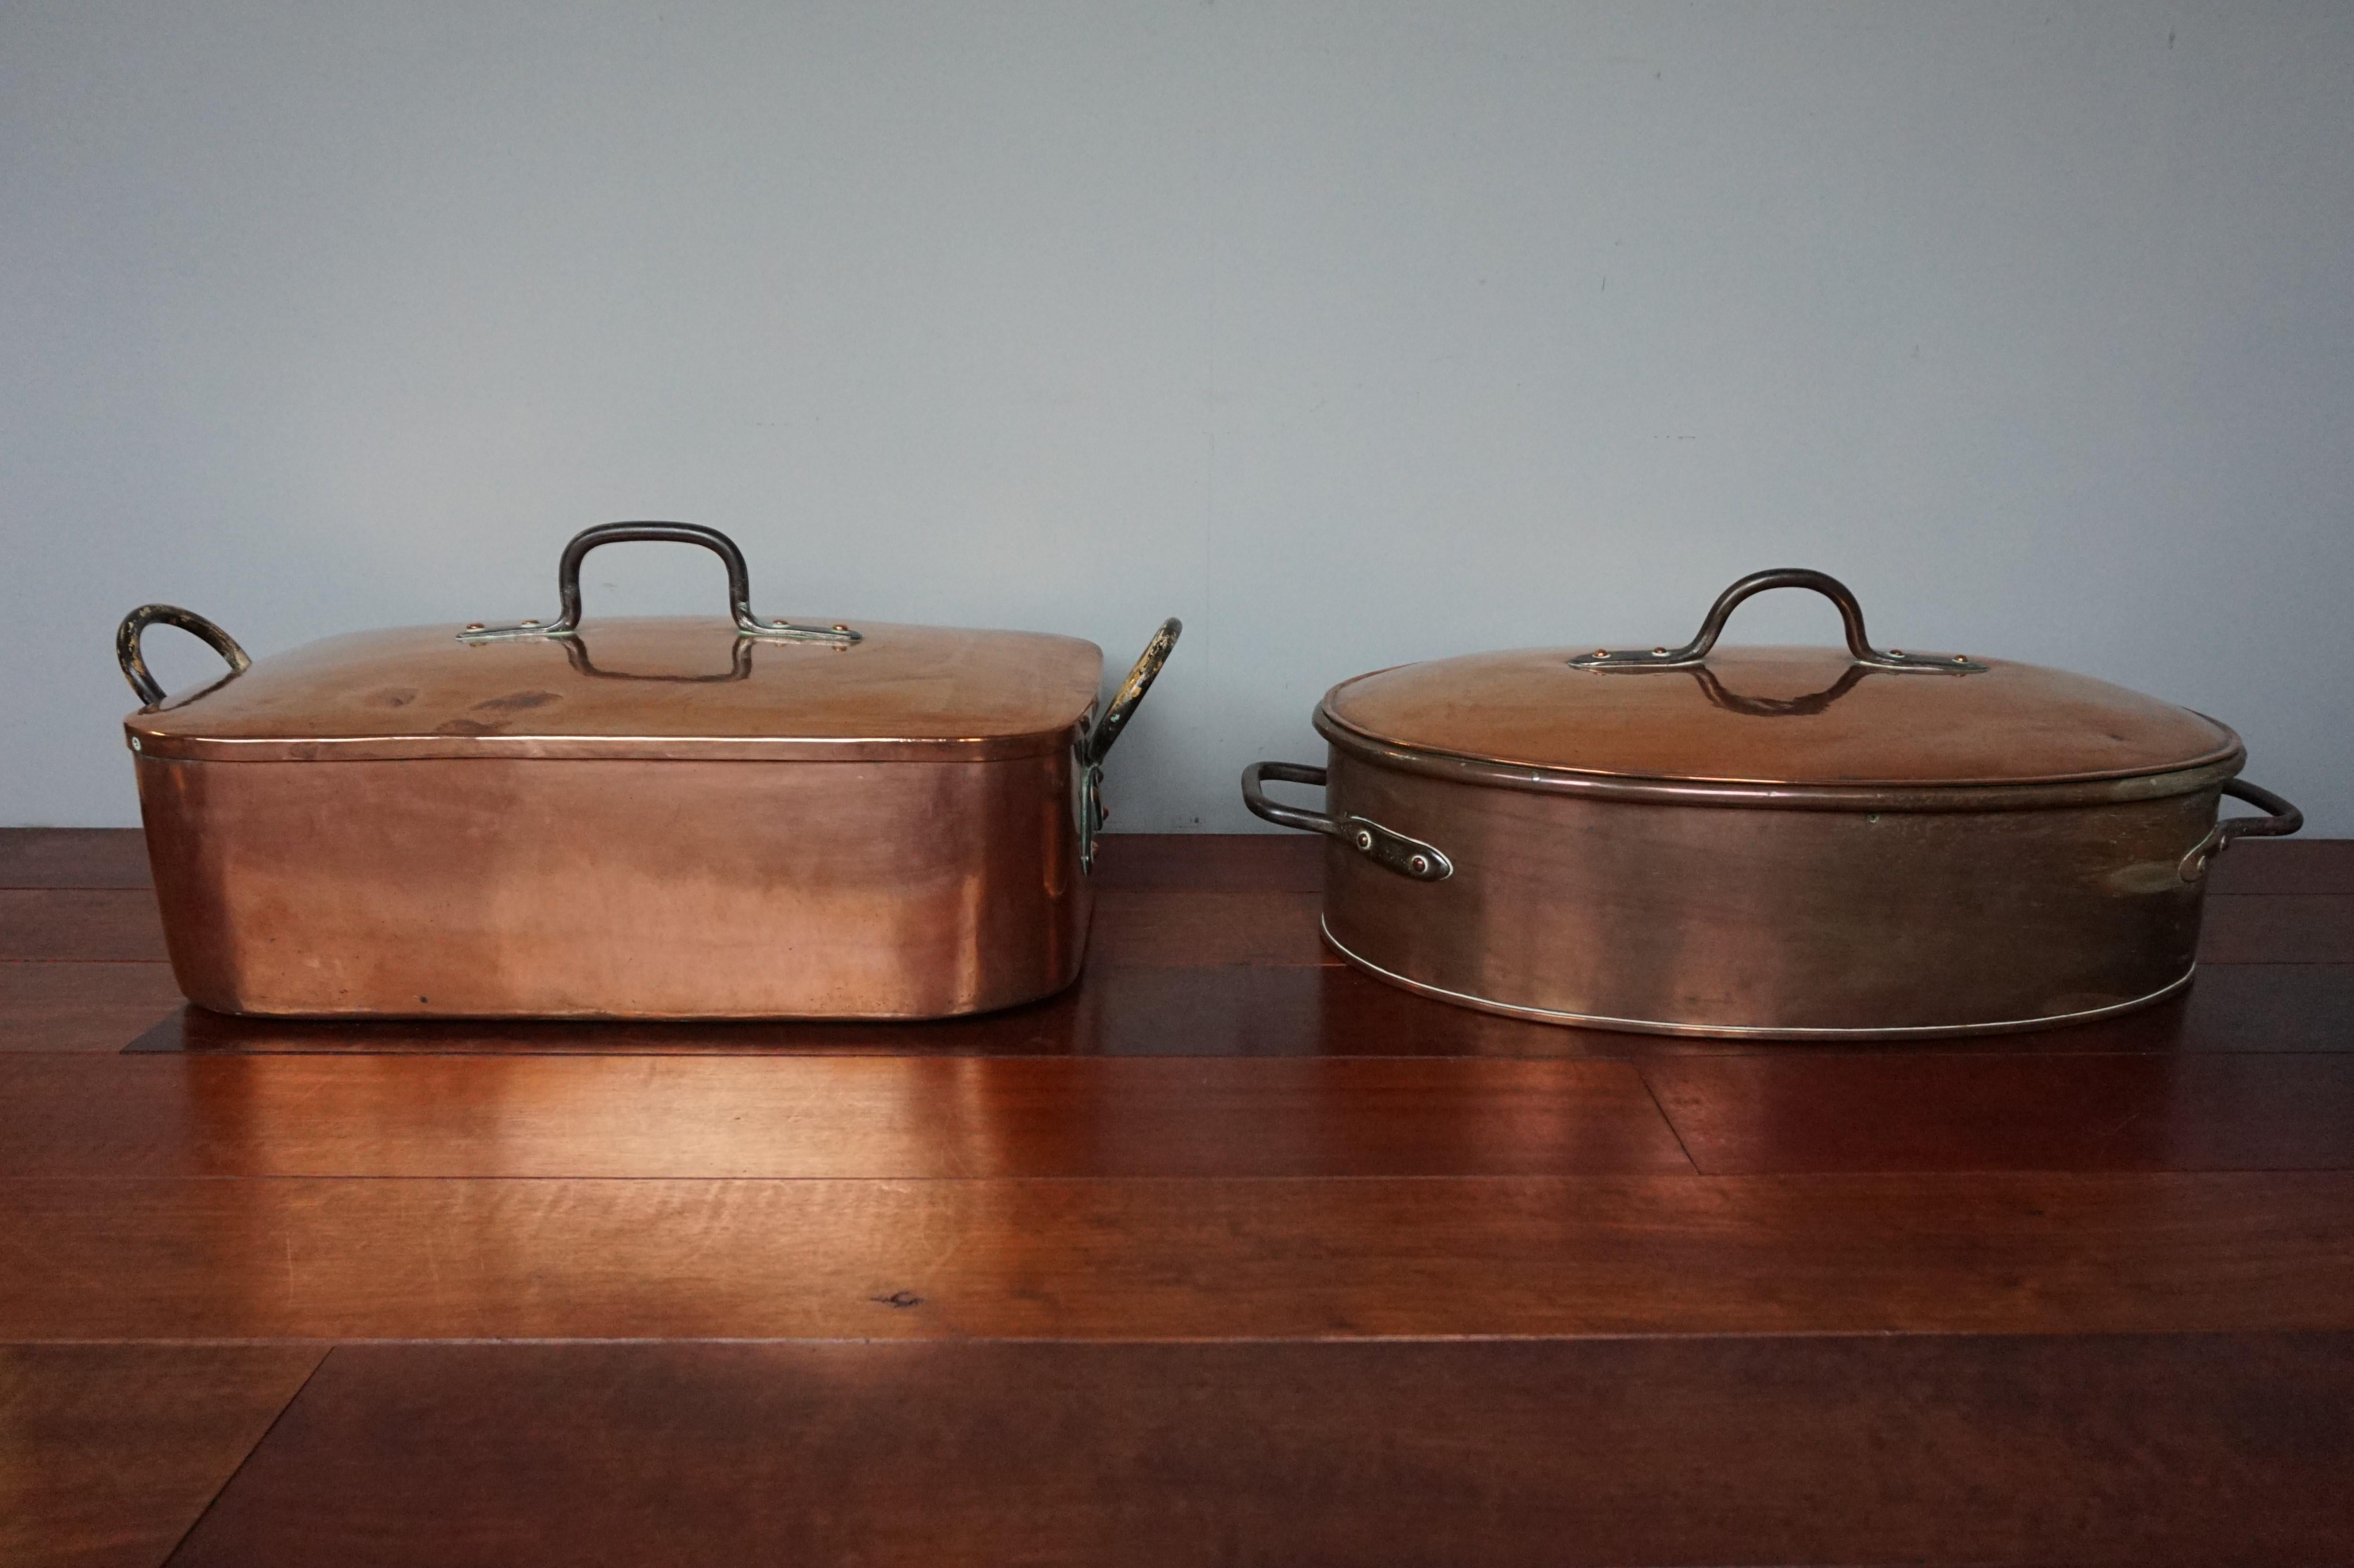 Stunning & Largest Ever Pair of Antique Copper Pans for Wild Roast in Late 1700s For Sale 14